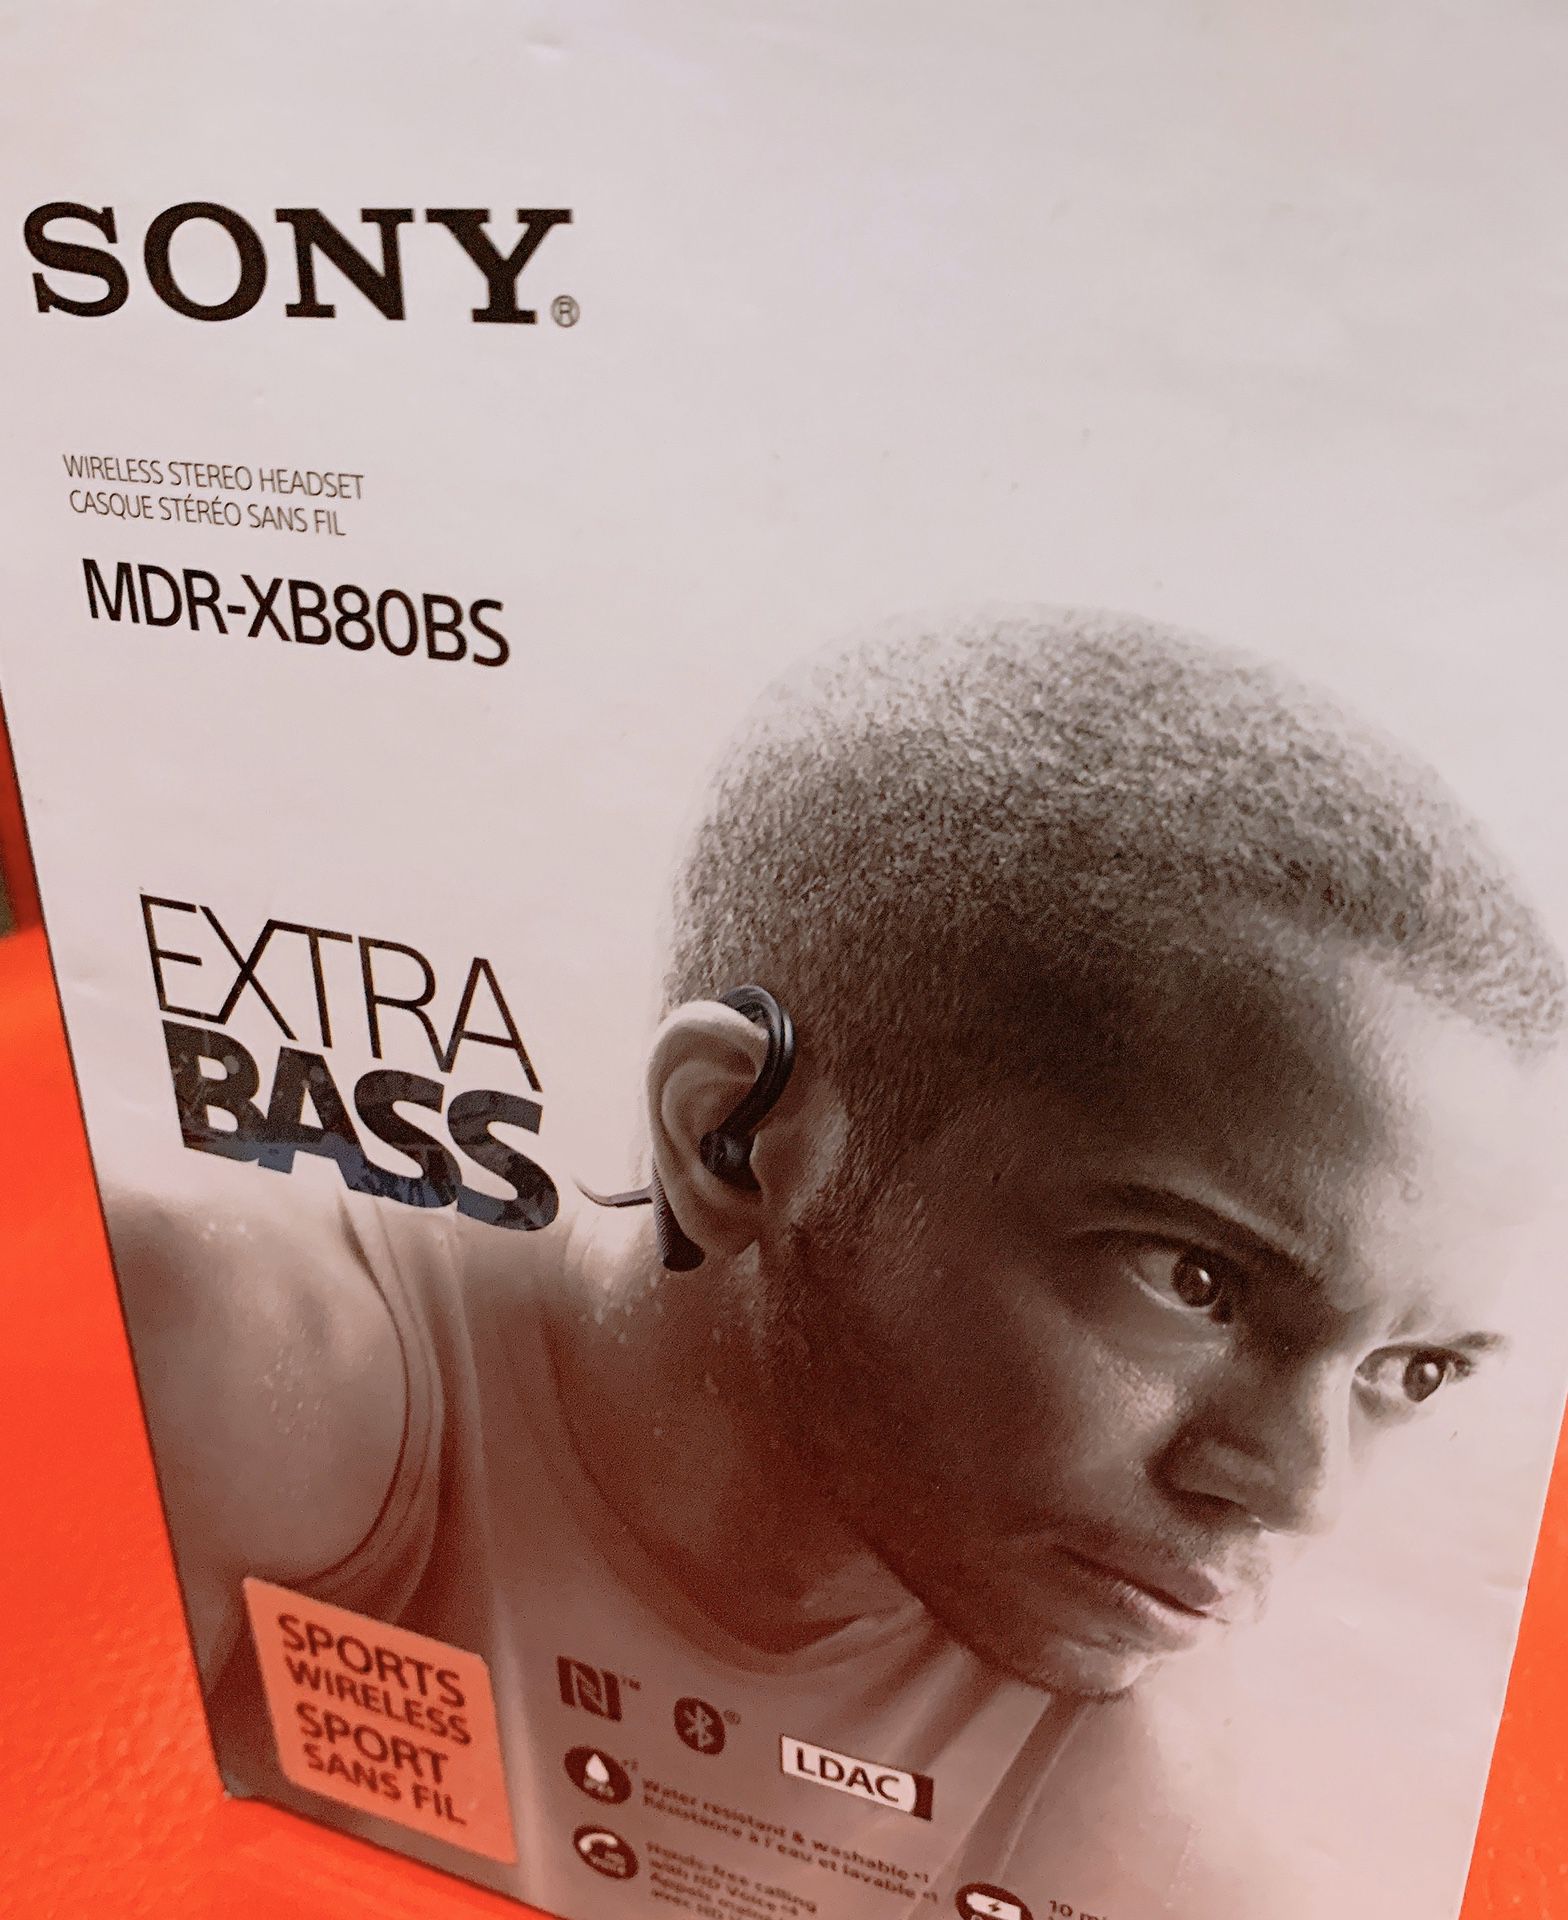 Sony mdr-xb80bs extra bass